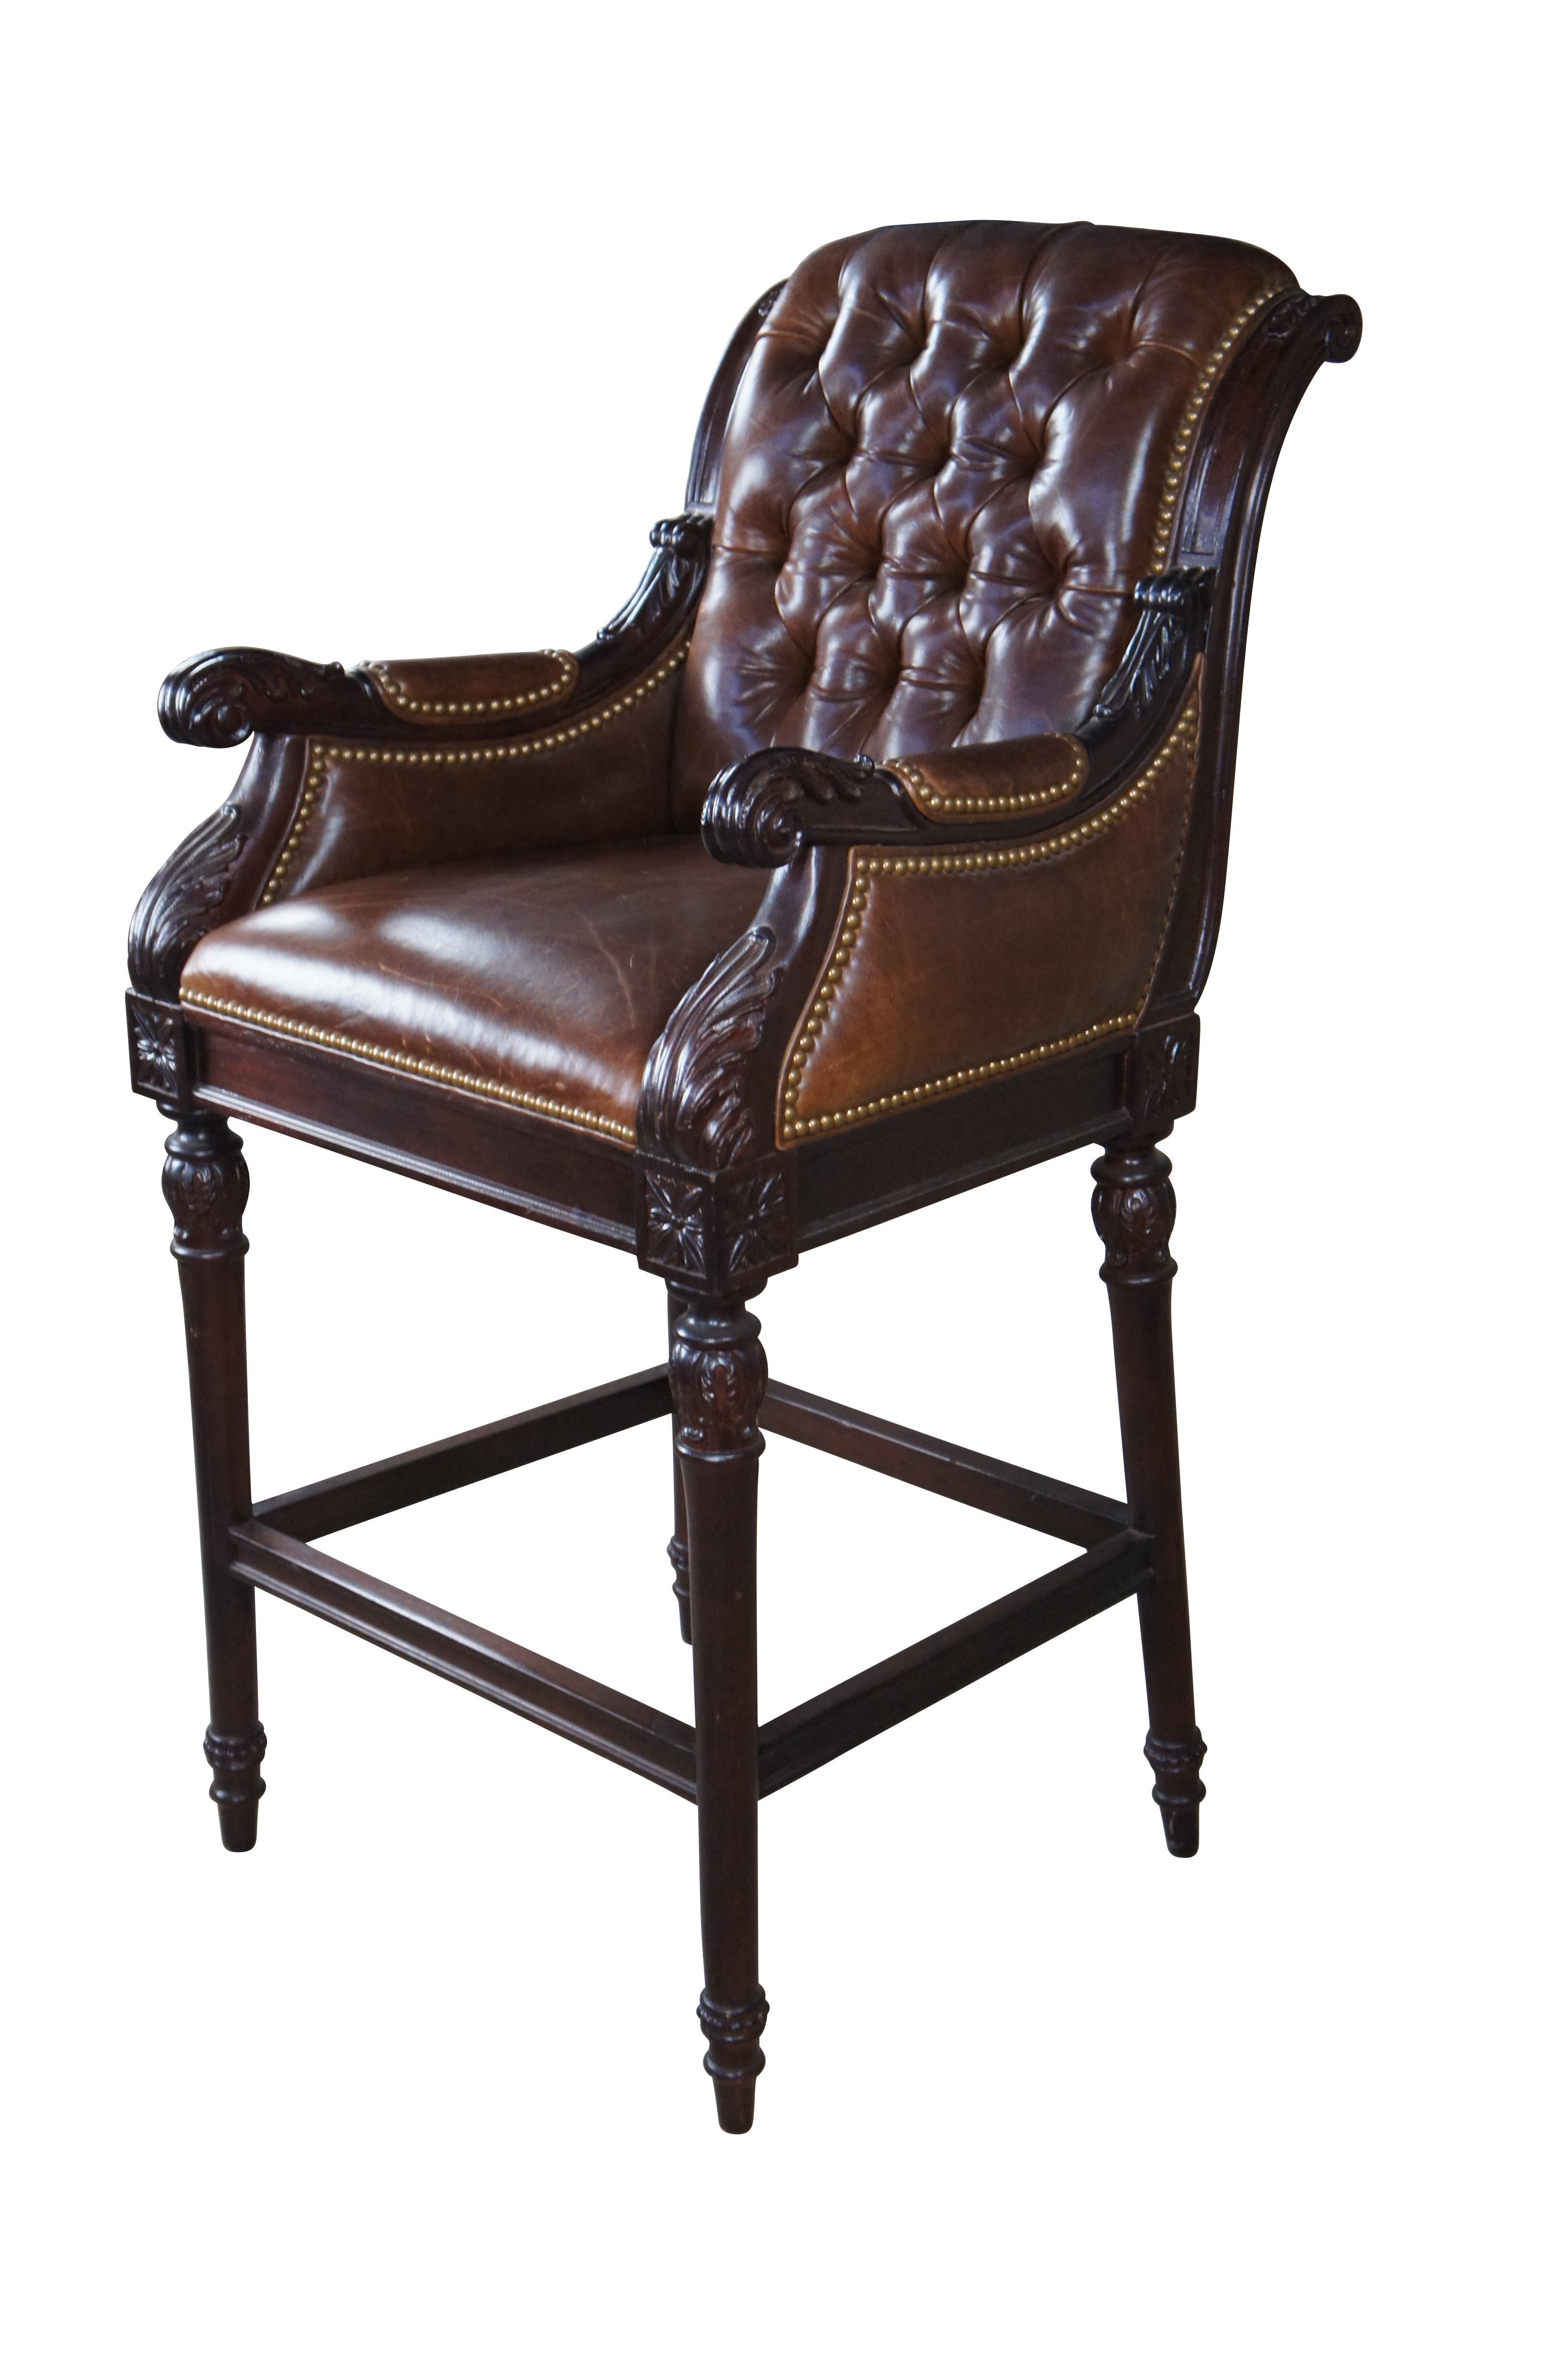 Exquisite Hancock & Moore French Chesterfield Bar Stool.  Features an acanthus carved mahogany frame with scrolled tufted back, upholstered in a rich top grain brown leather with nailhead trim.  Includes French carved medallions and turned tapered